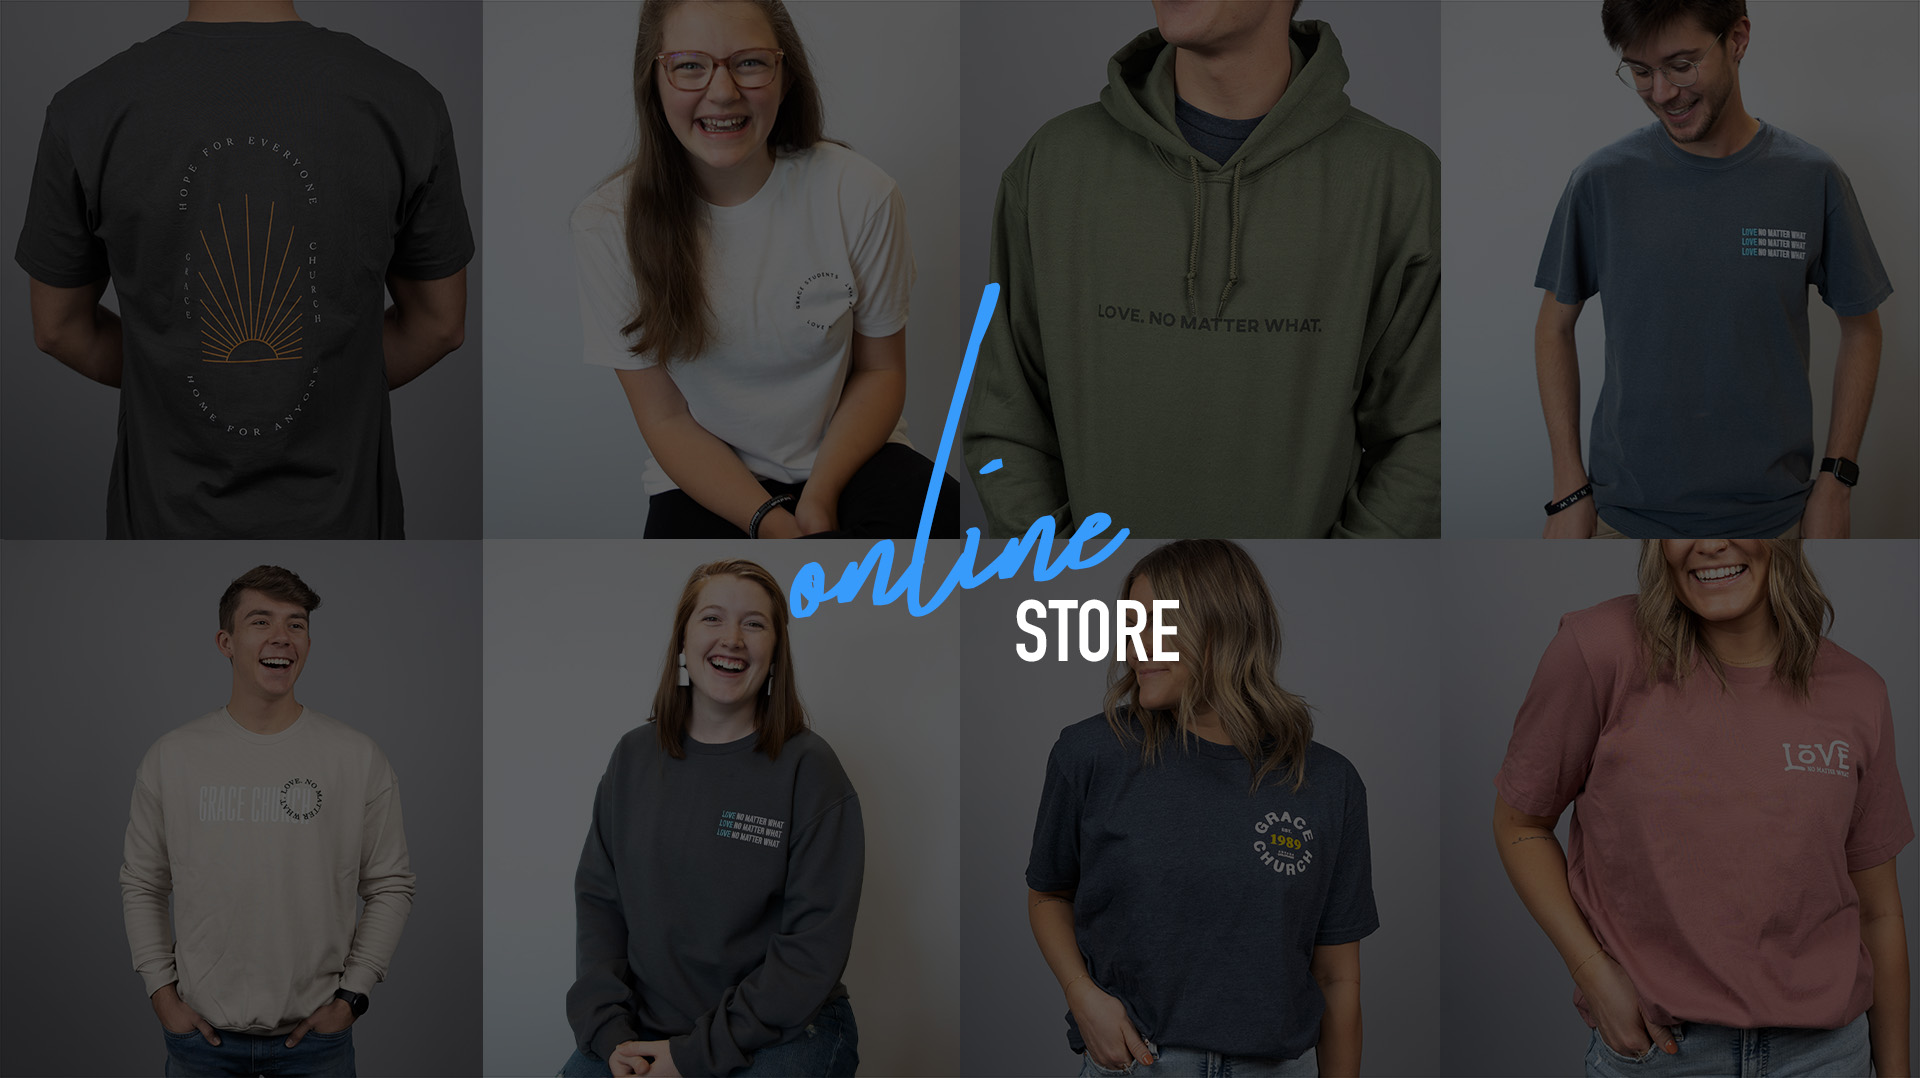 Check Out Our Online Store

Order Grace Church or Grace Union gear!
